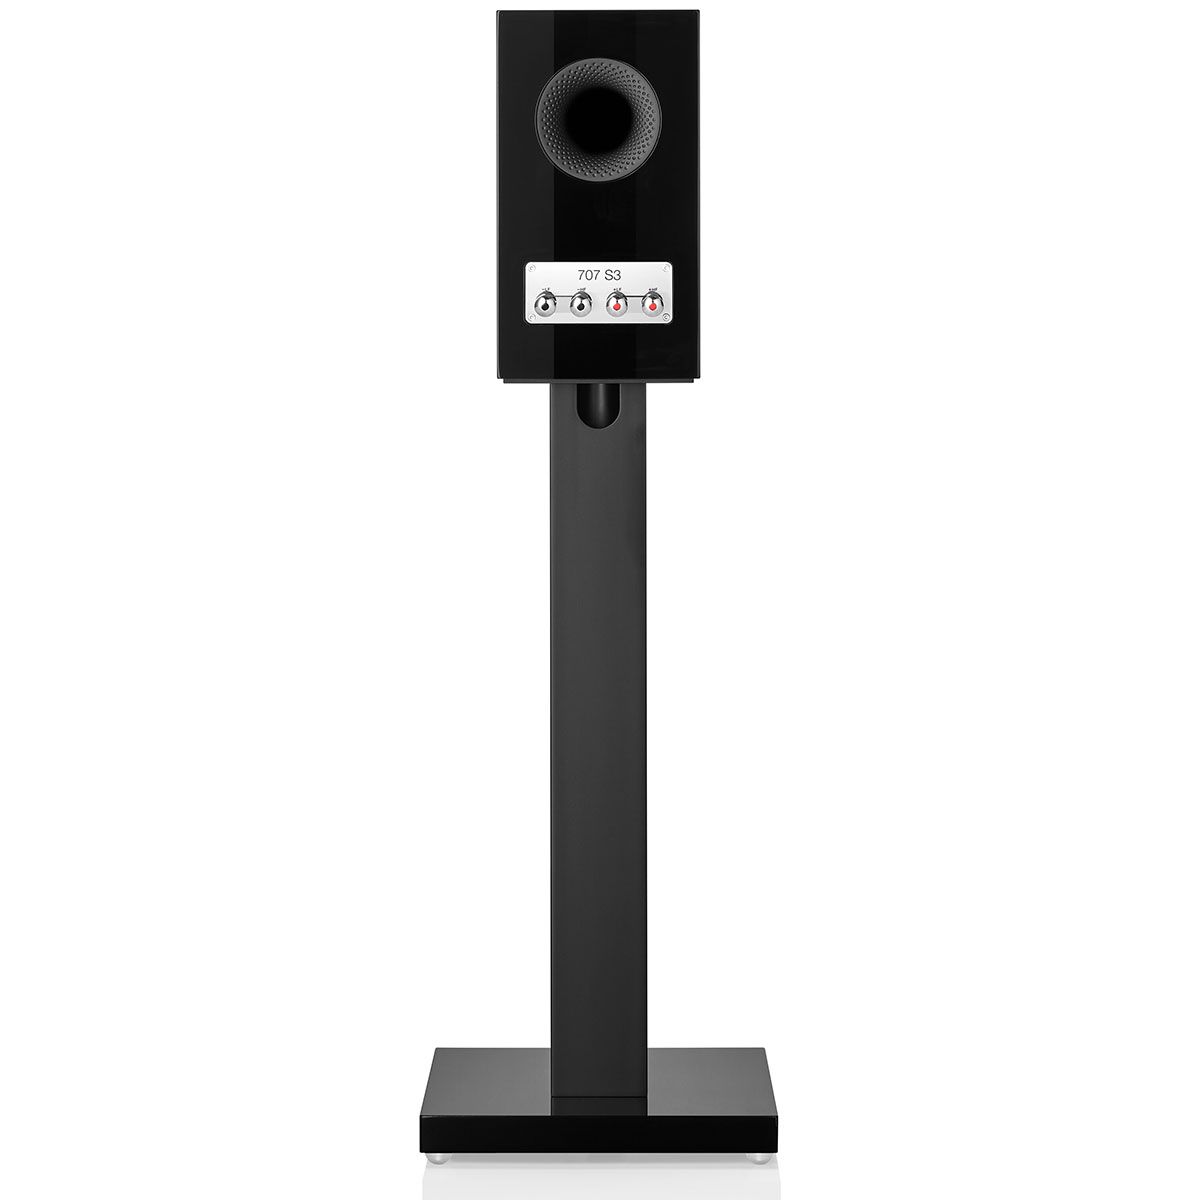 Bowers & Wilkins 707 S3 2-Way Stand Mount Bookshelf Loudspeakers - Gloss Black - on stand showing rear connections